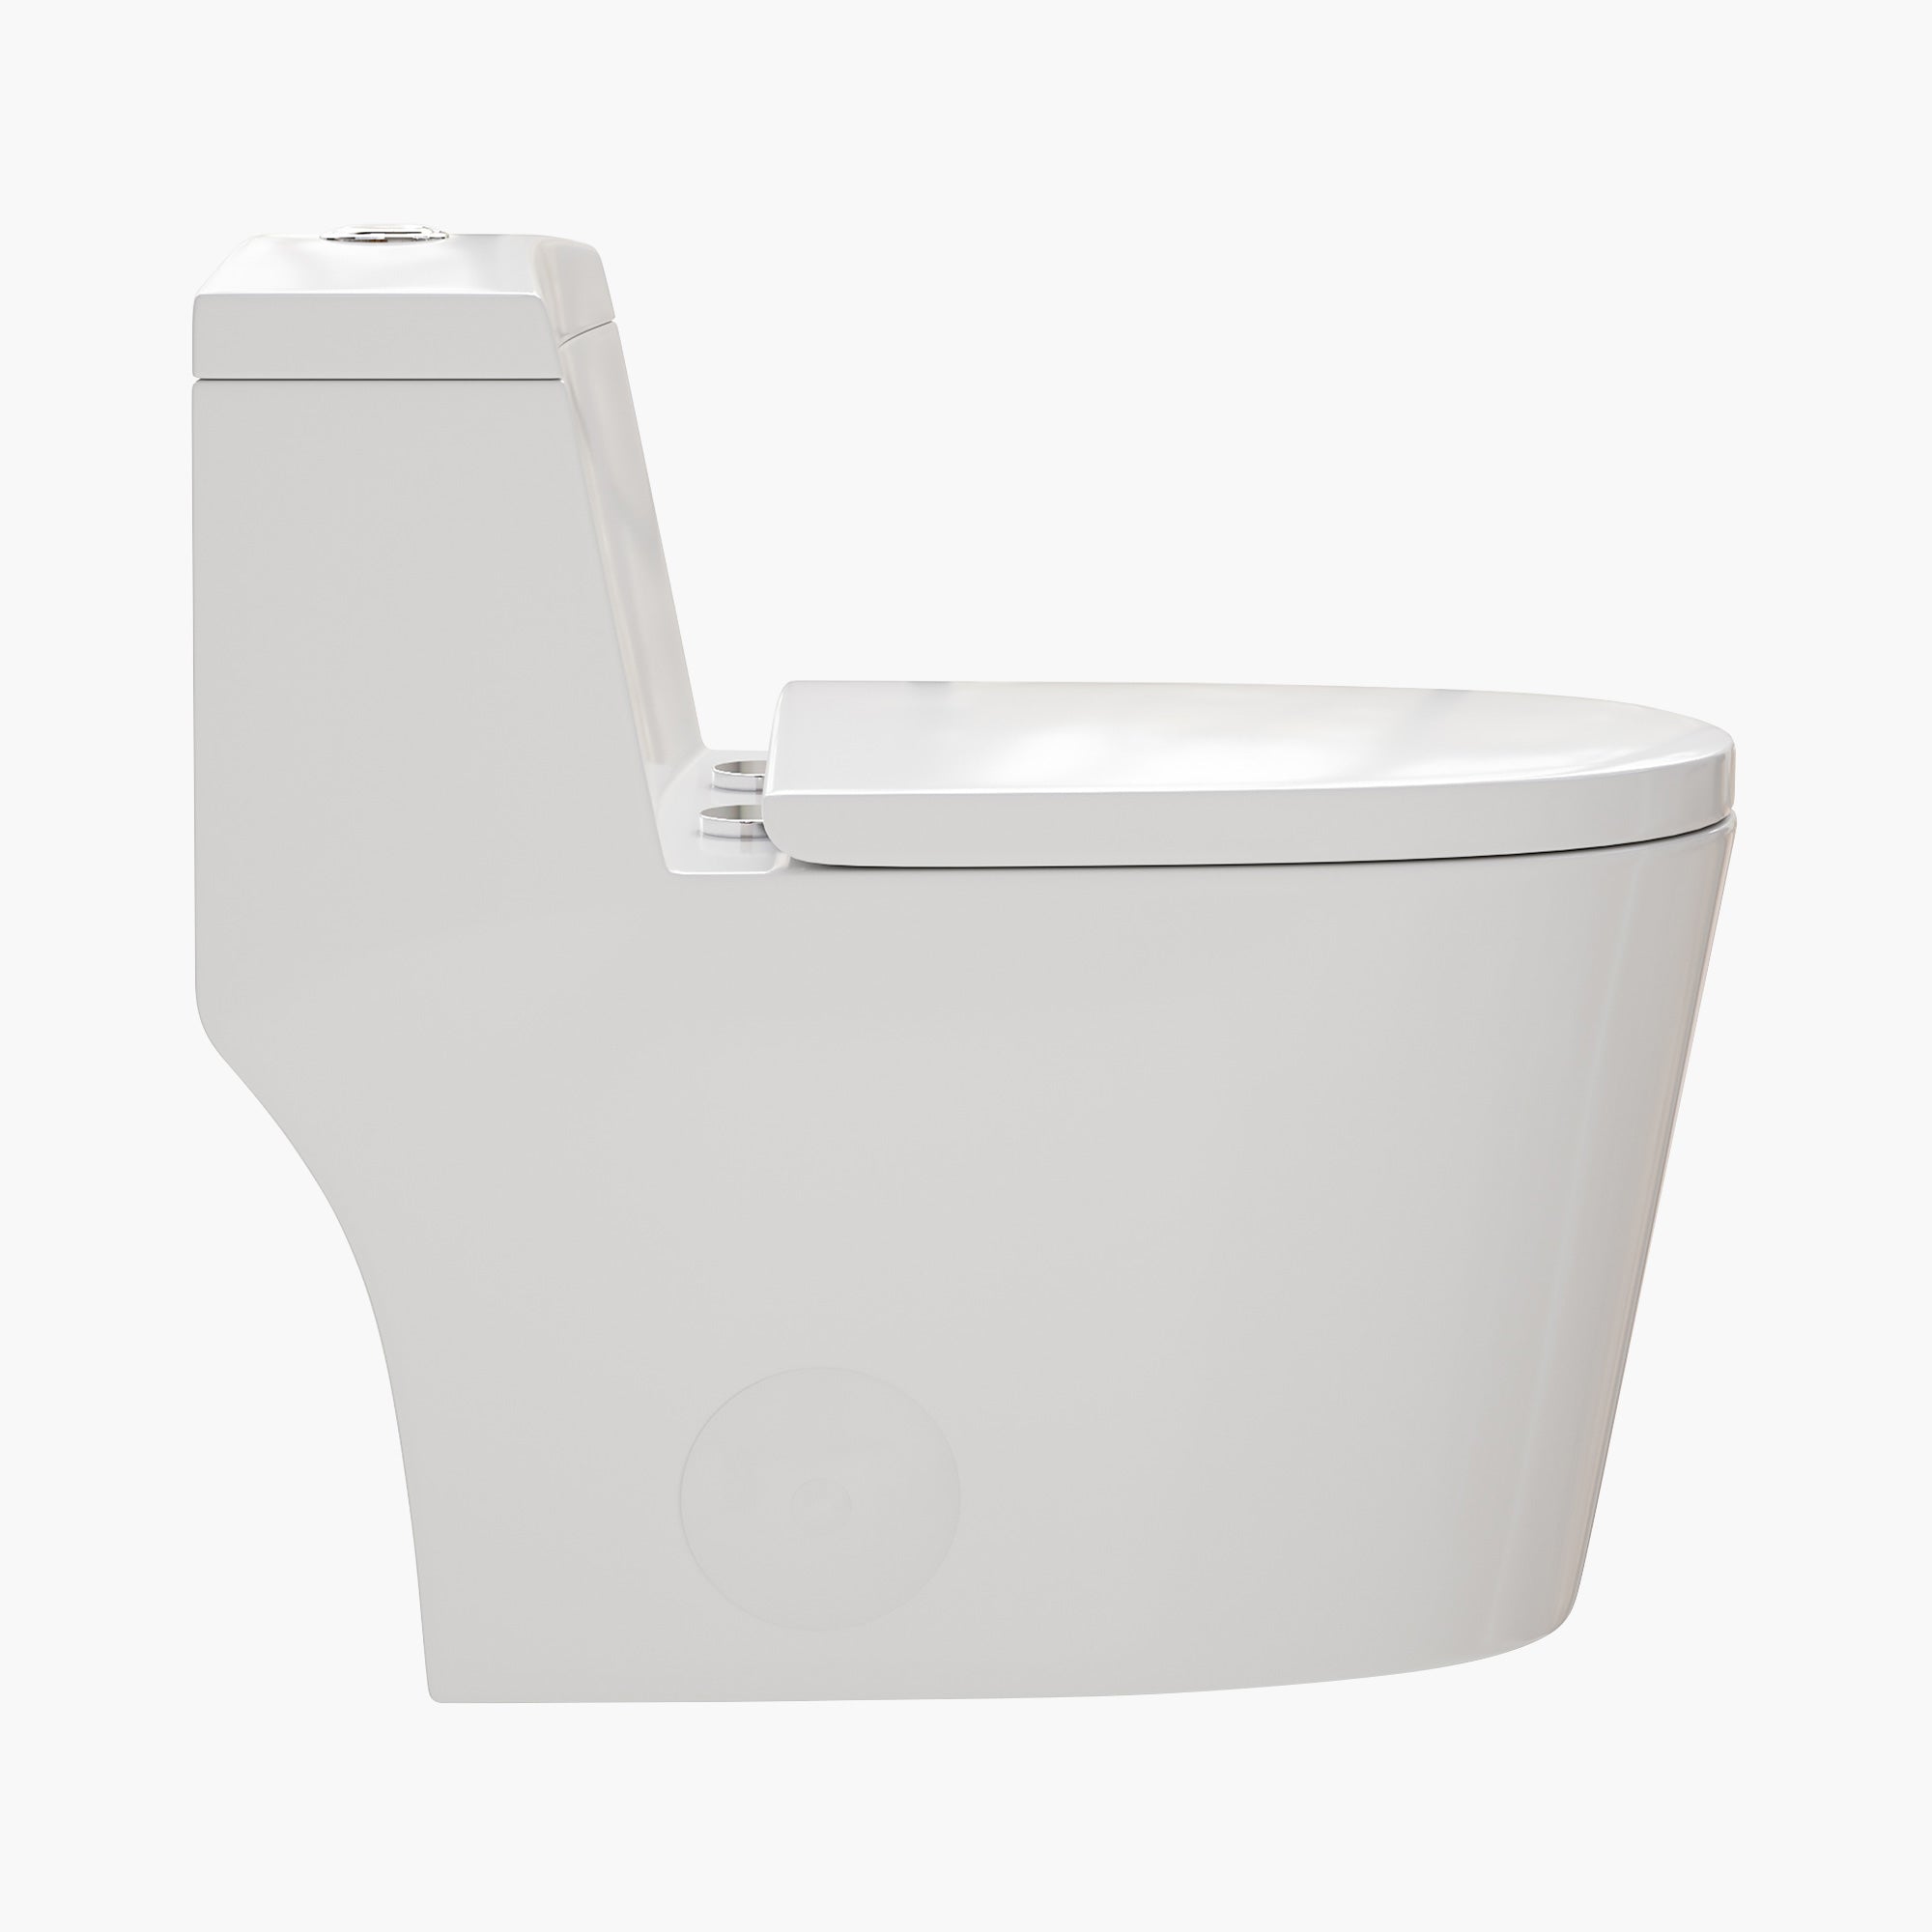 HOROW Compact Elongated Toilet One Piece Dual Flush 1.1 OR 1.6 GPF Toilet Model T0280W